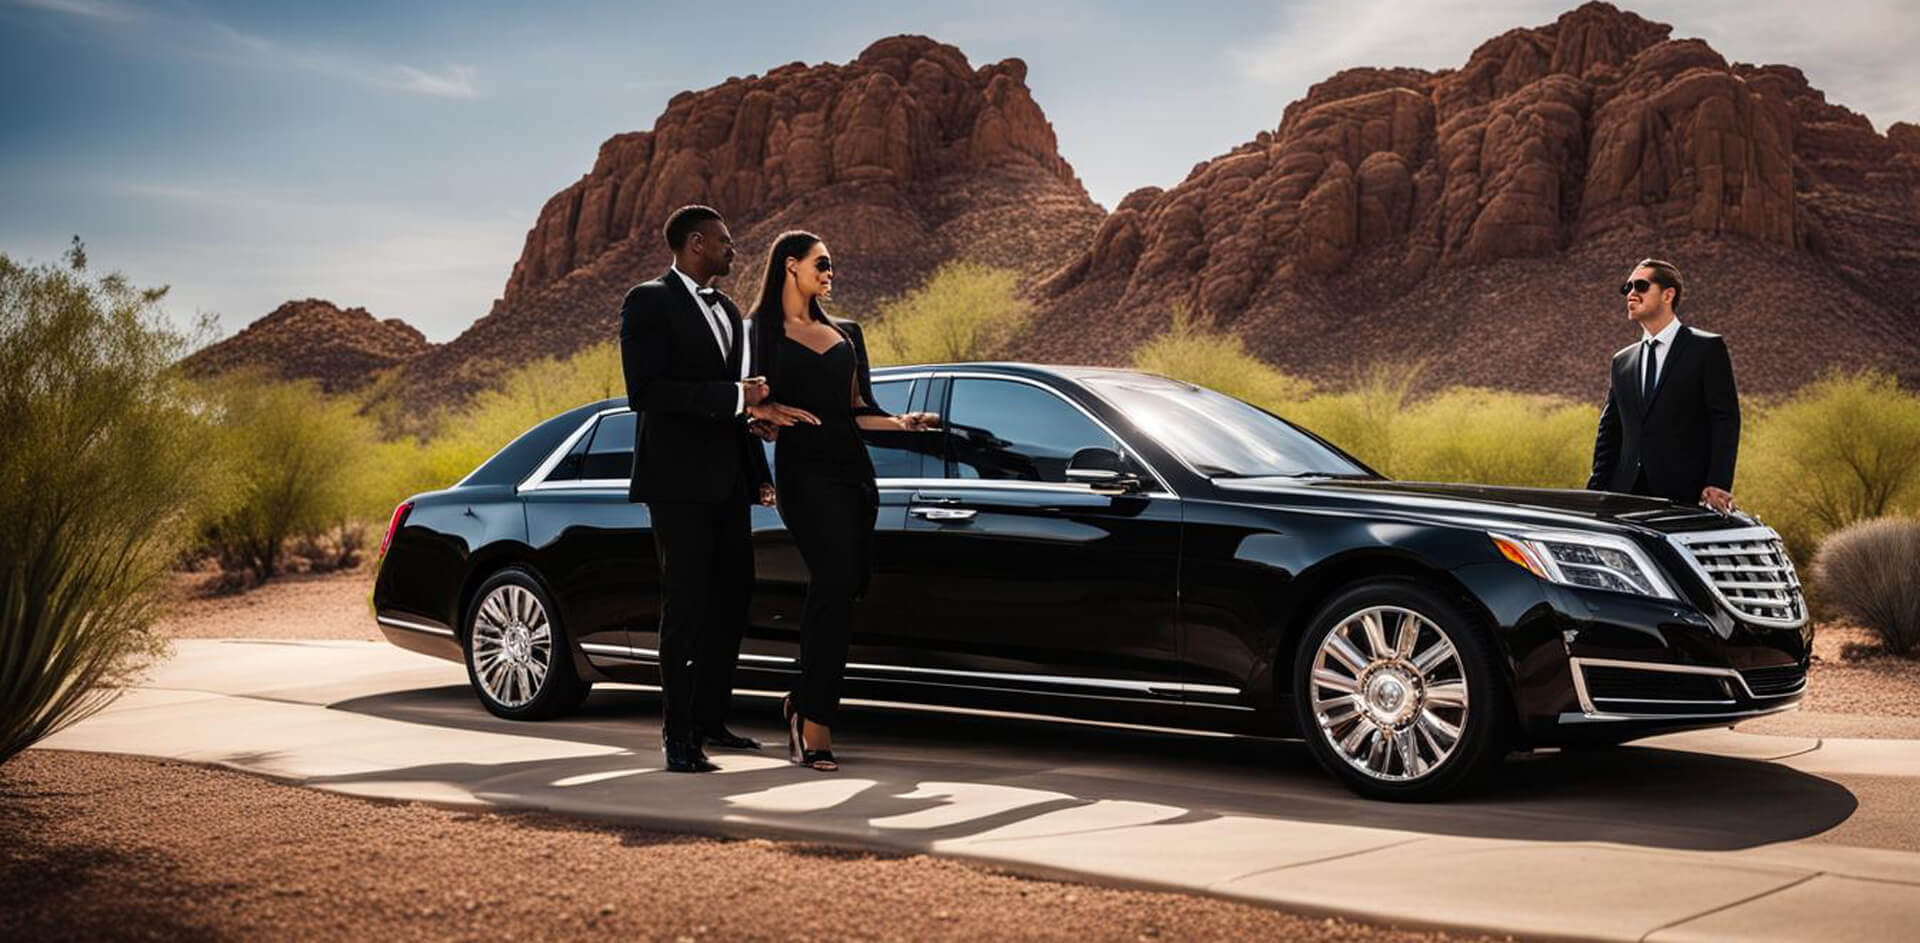 Fountain Hills limousine experience